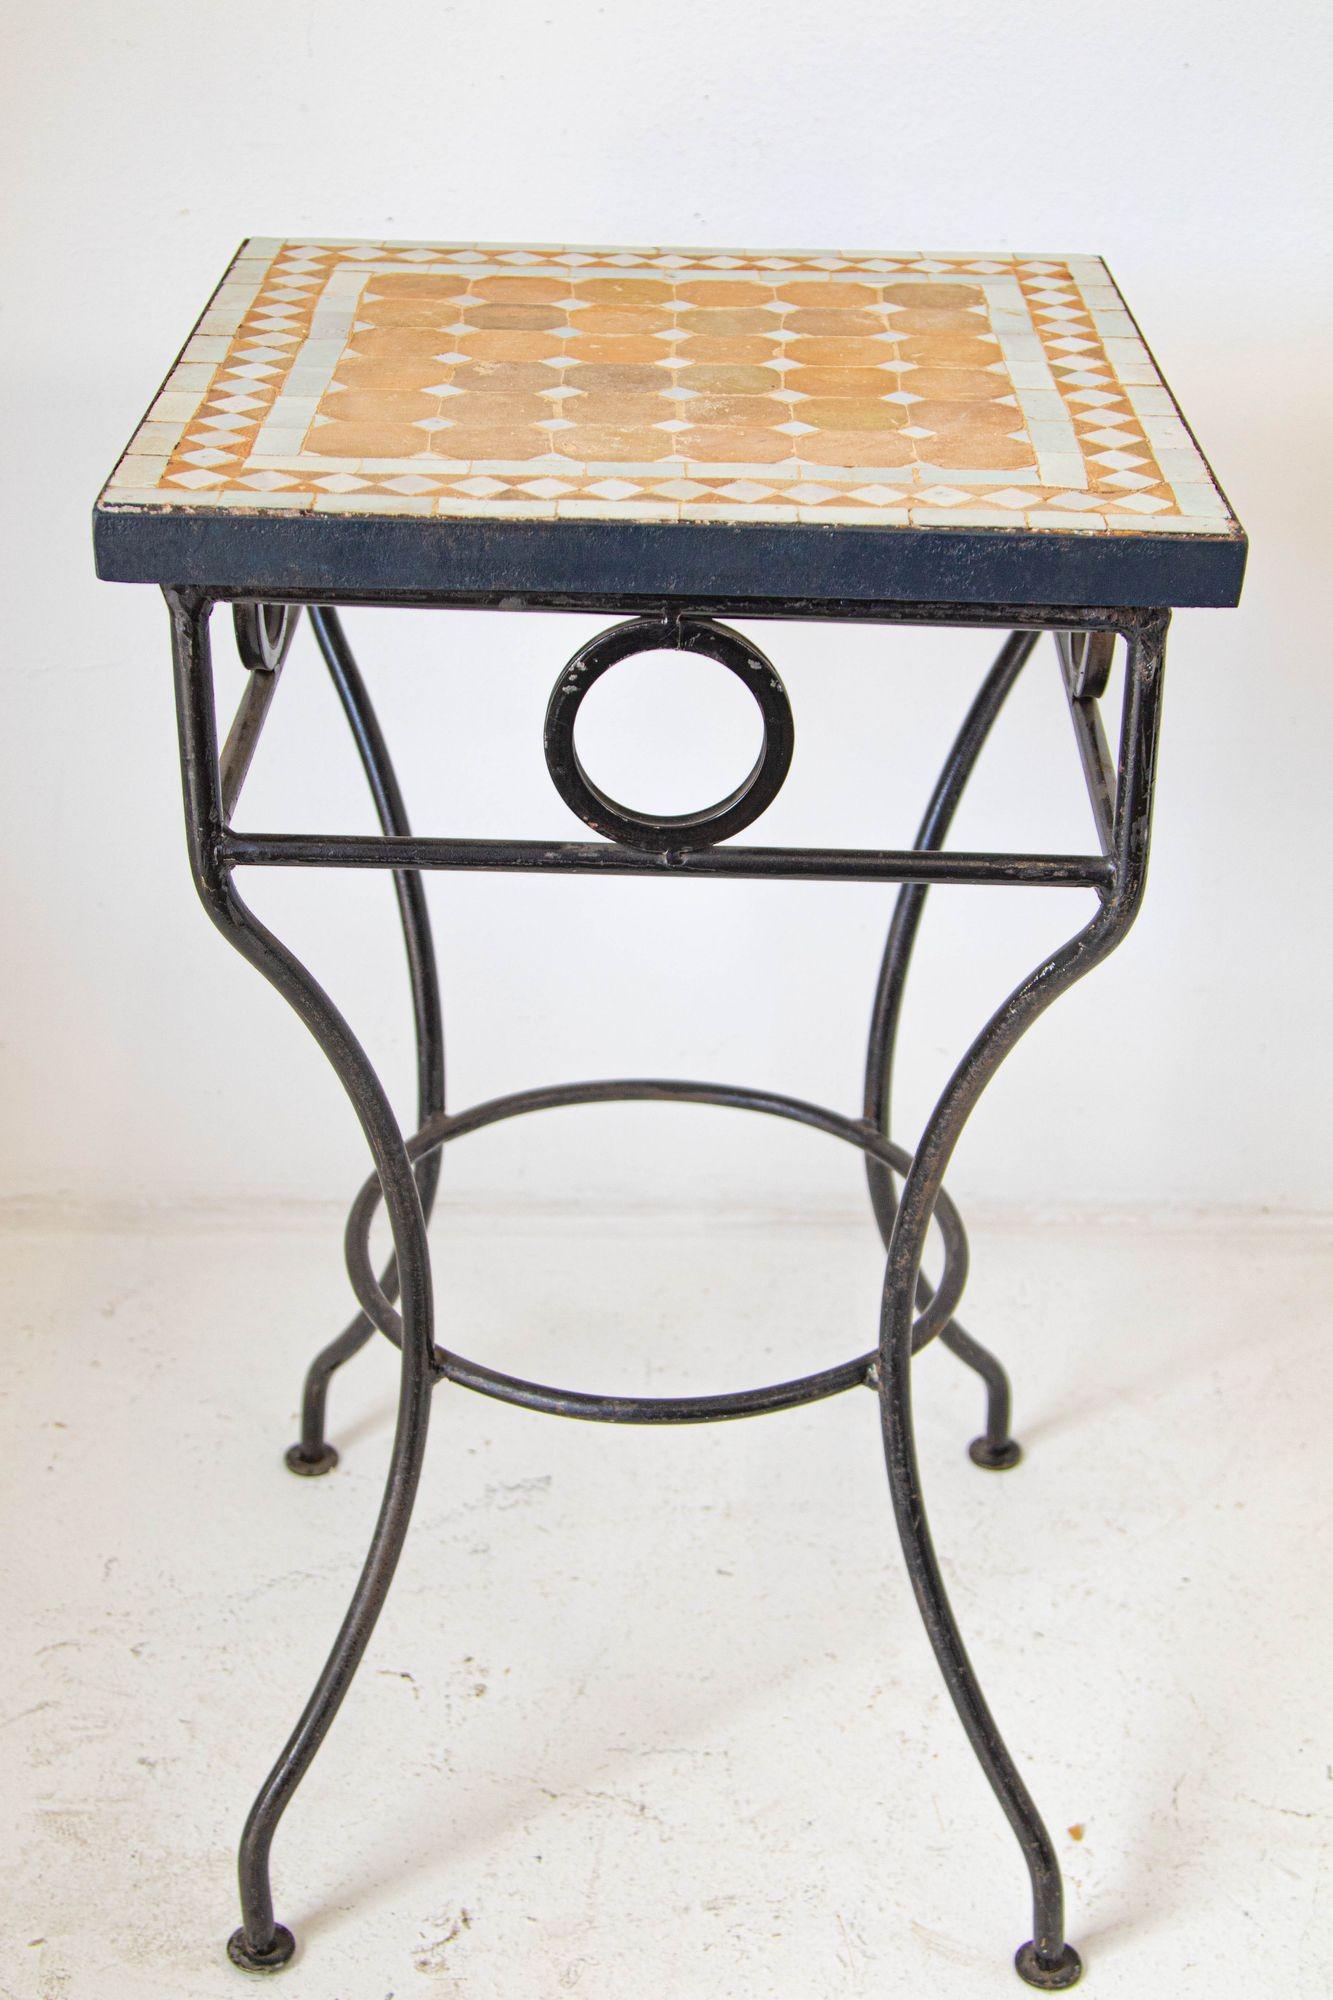 Vintage Moroccan Mosaic tile outdoor table.
Moroccan mosaic tile square shape bistro table on iron base.
Handmade by expert artisans in Fez, Morocco using reclaimed old glazed ivory and tan tiles inlaid in concrete using reclaimed old glazed tiles